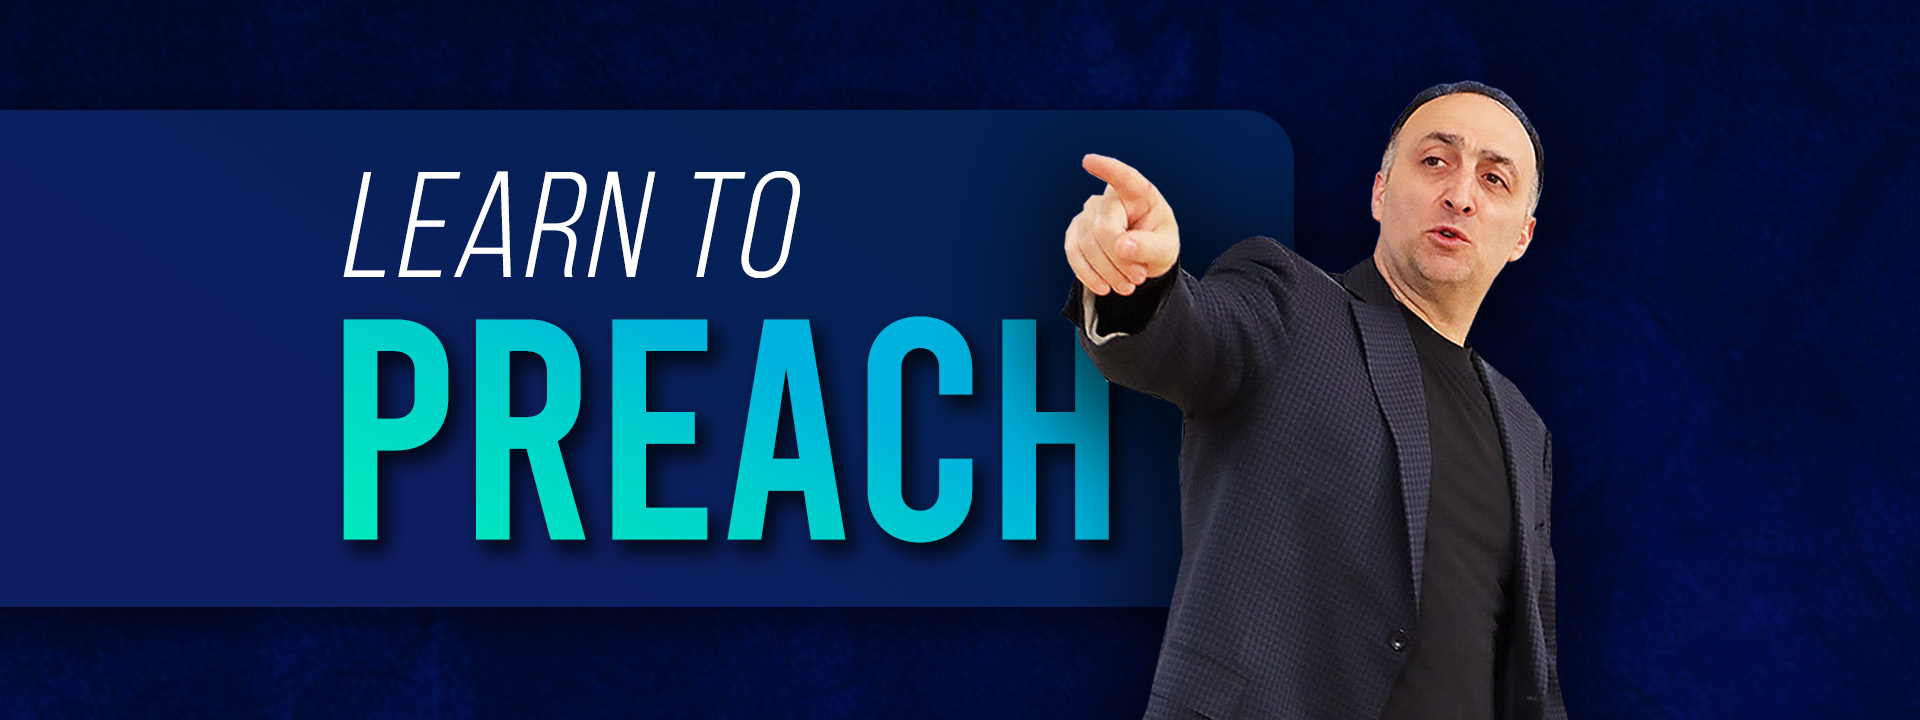 Learn To Preach - Workshop With Pastor Armen